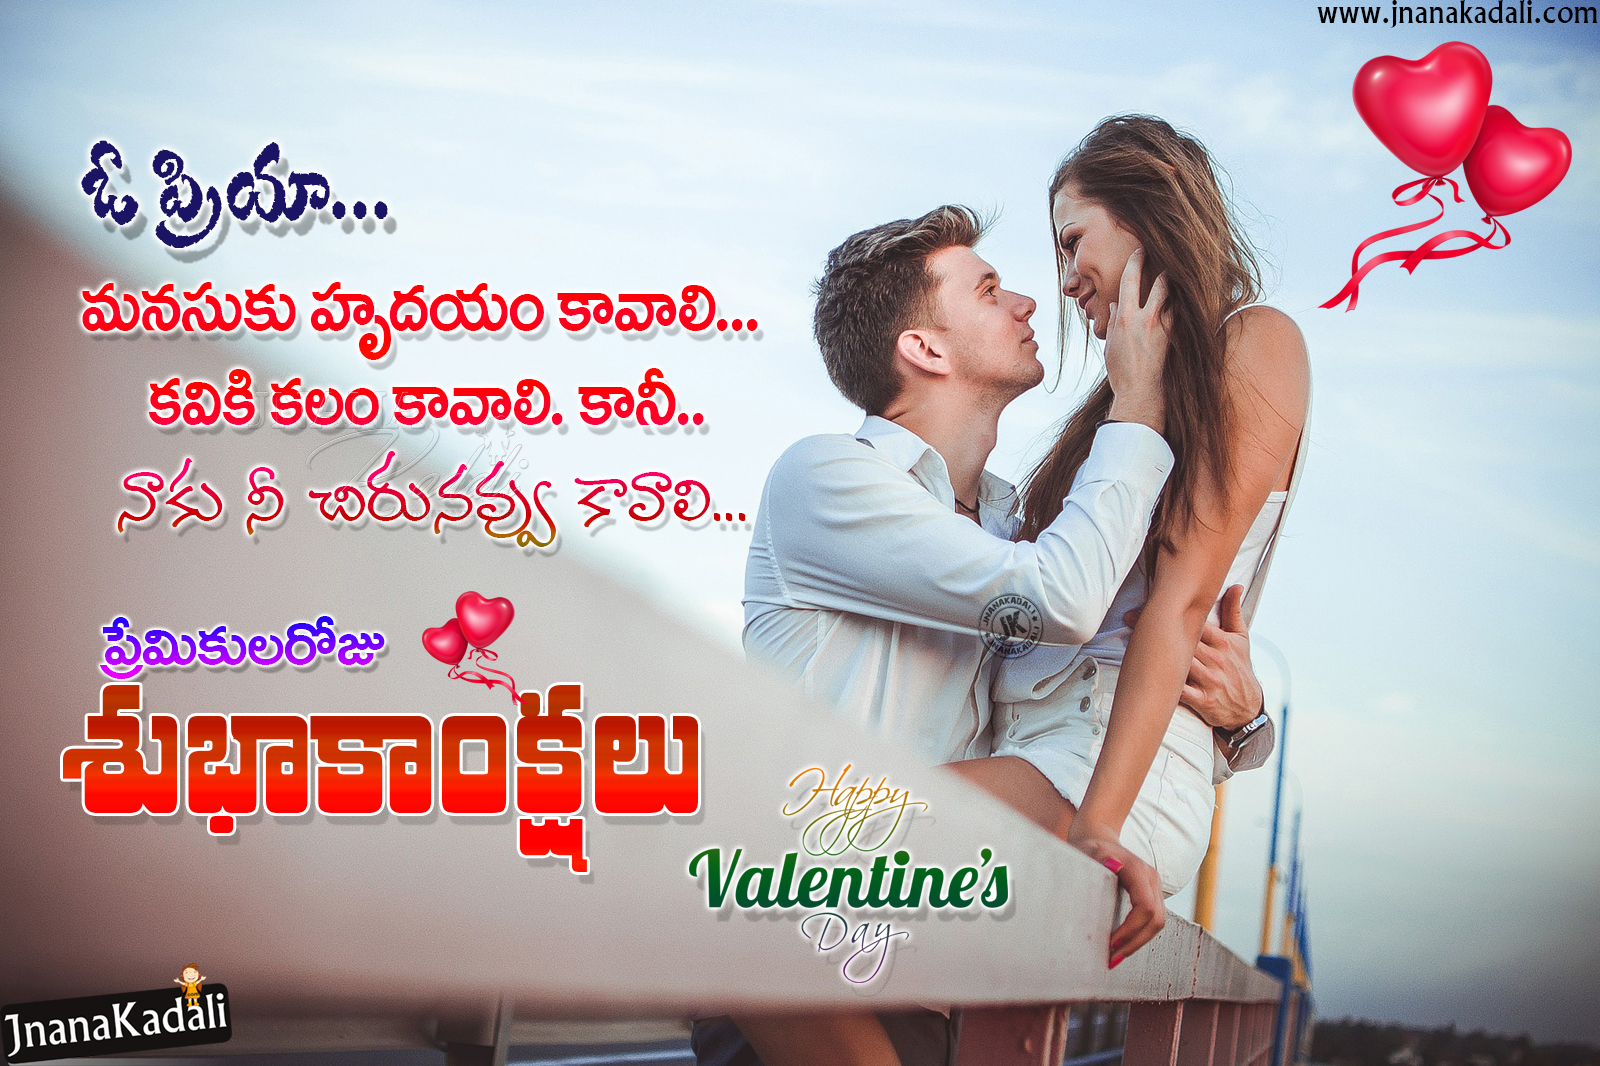 Trending Valentines Day Greetings With Hd Wallpapers Free Download ...